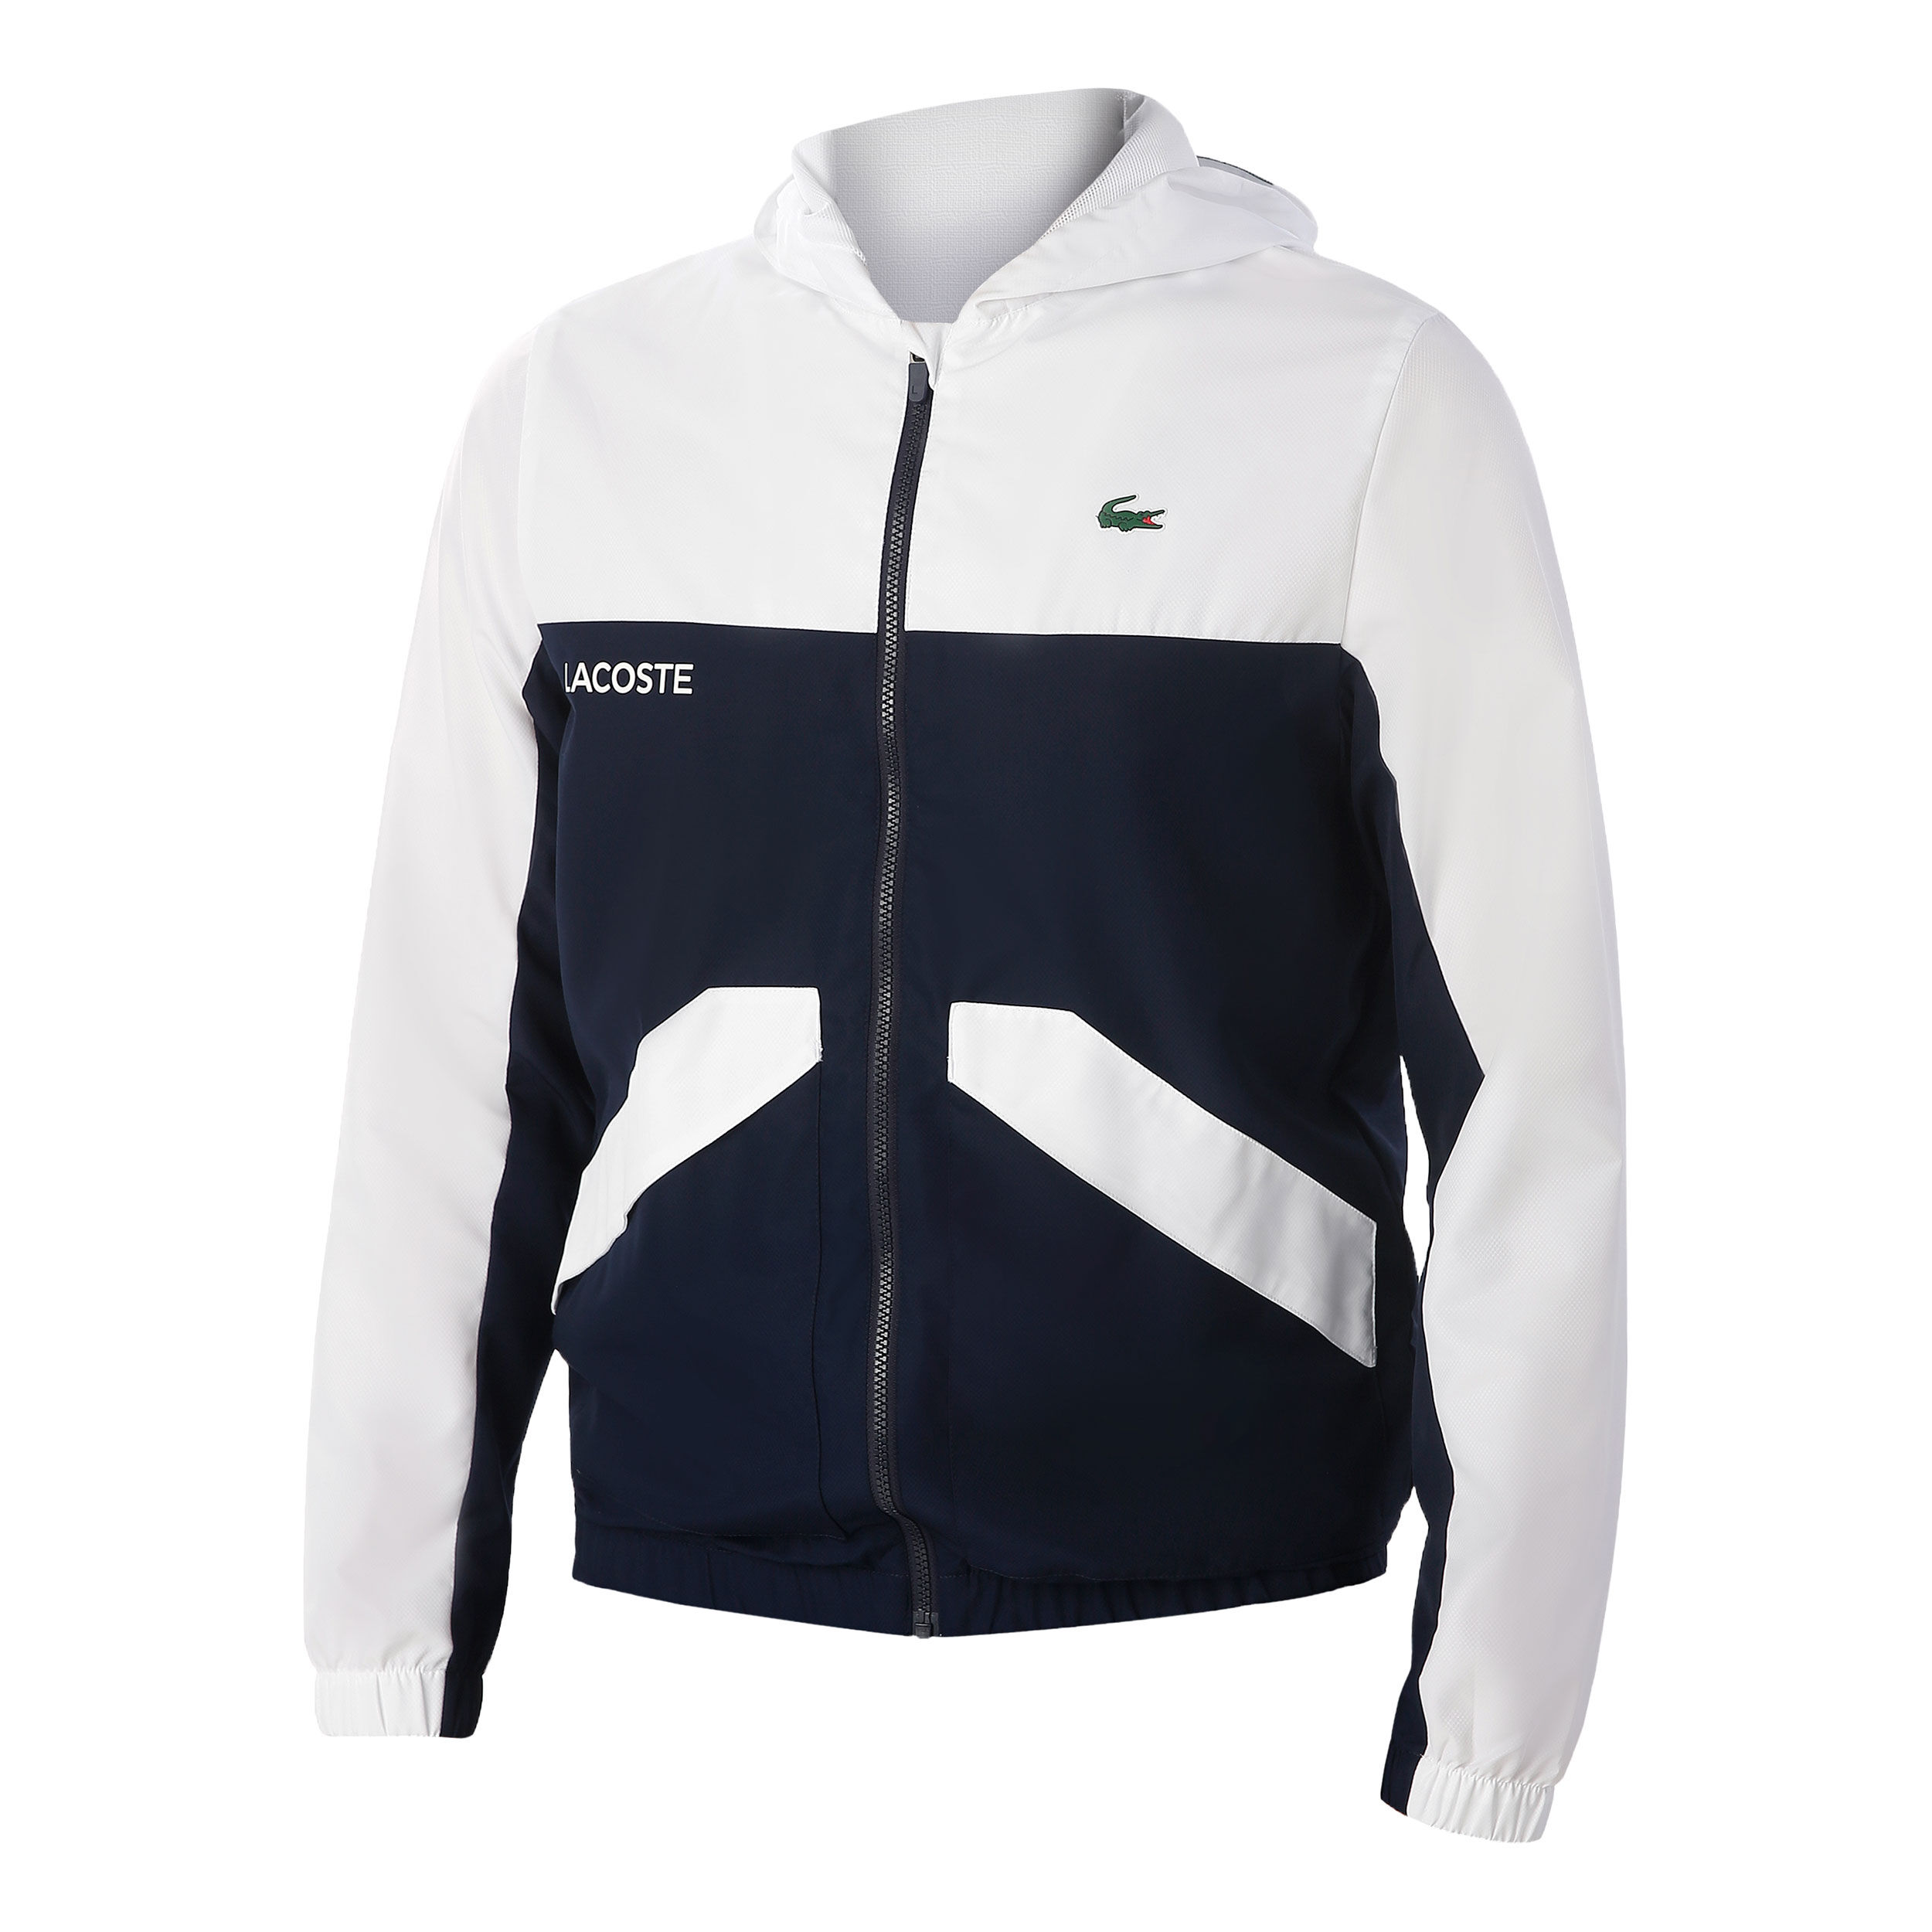 lacoste jackets for men